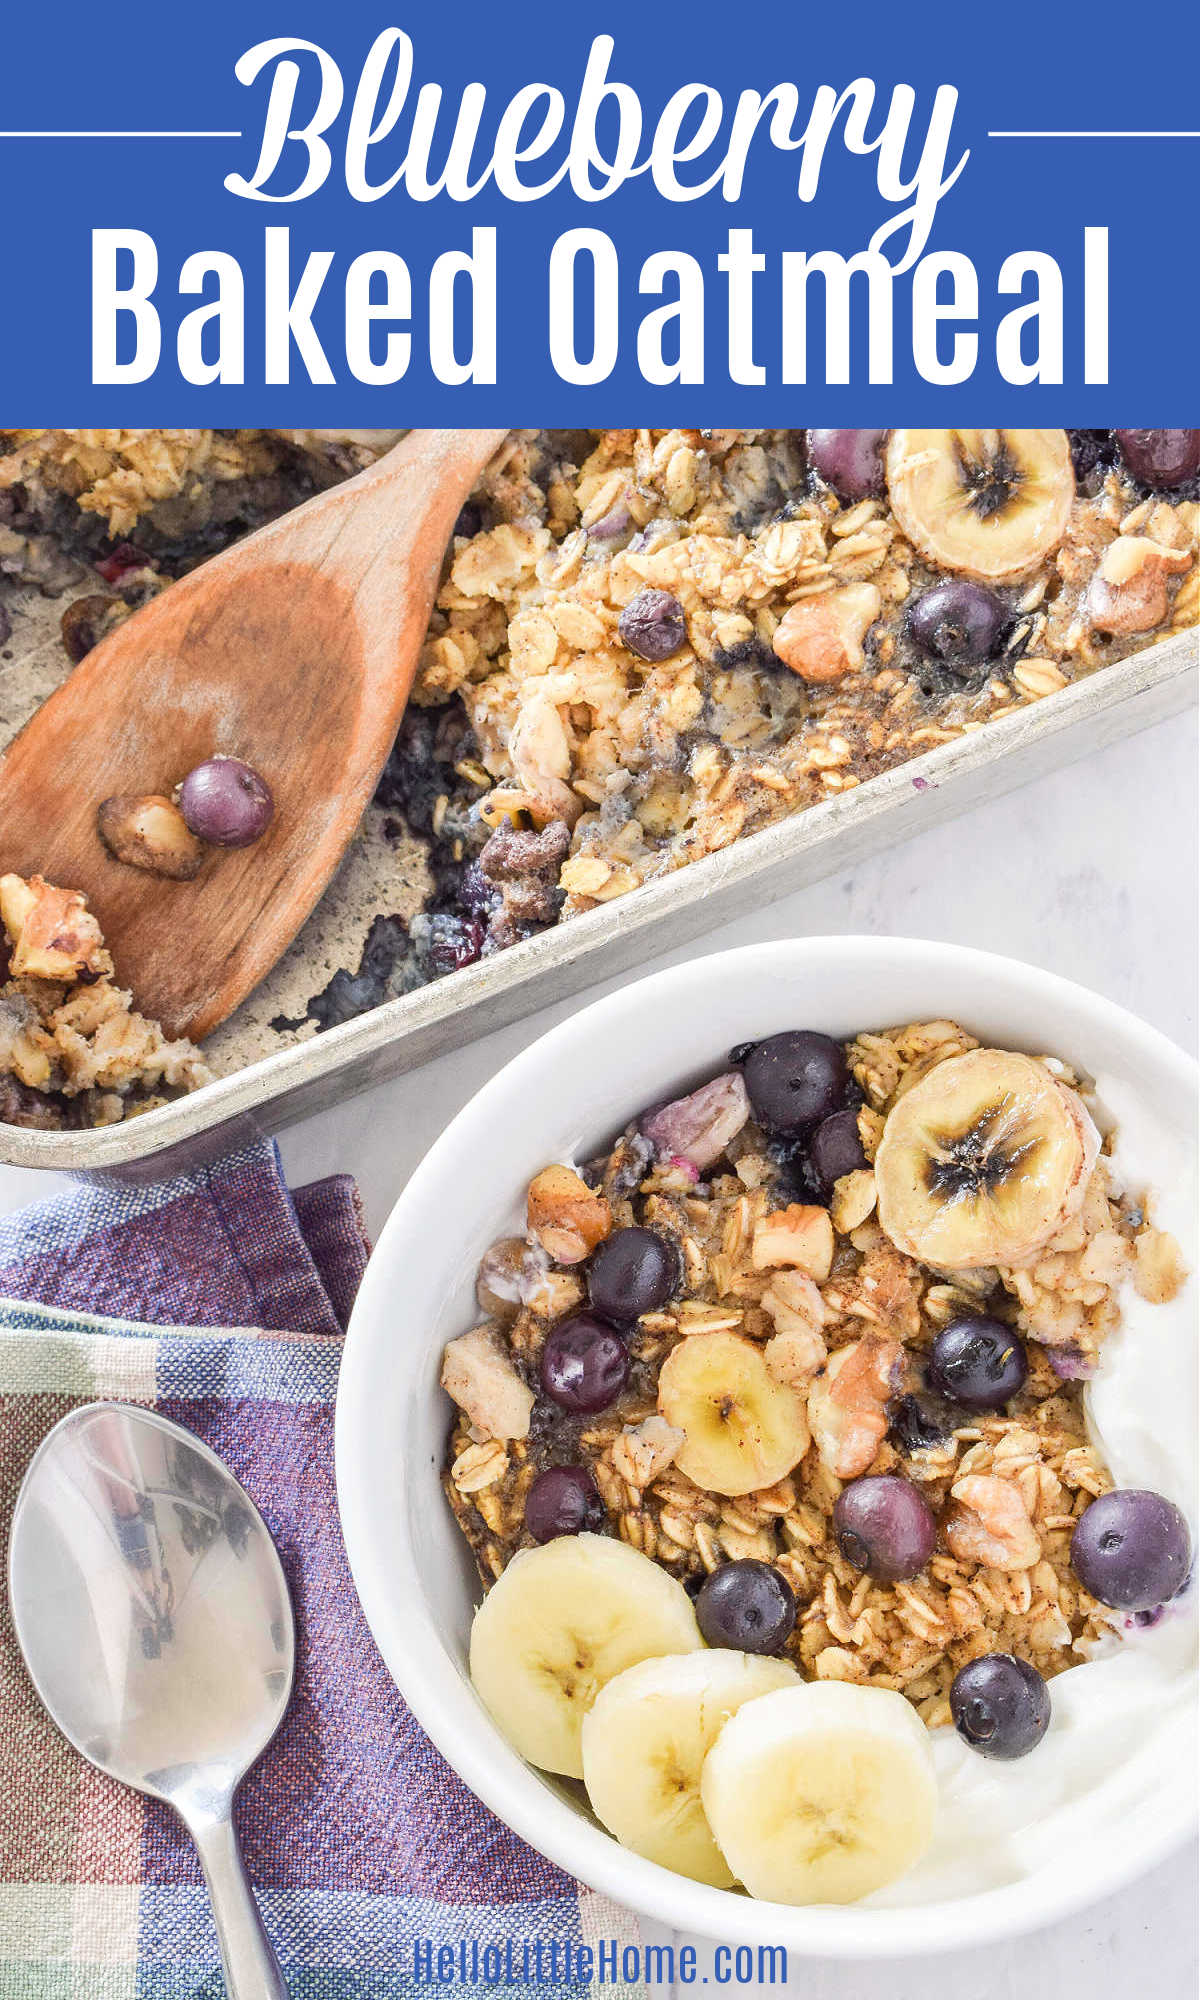 A bowl of Blueberry Baked Oatmeal next to a baking pan.